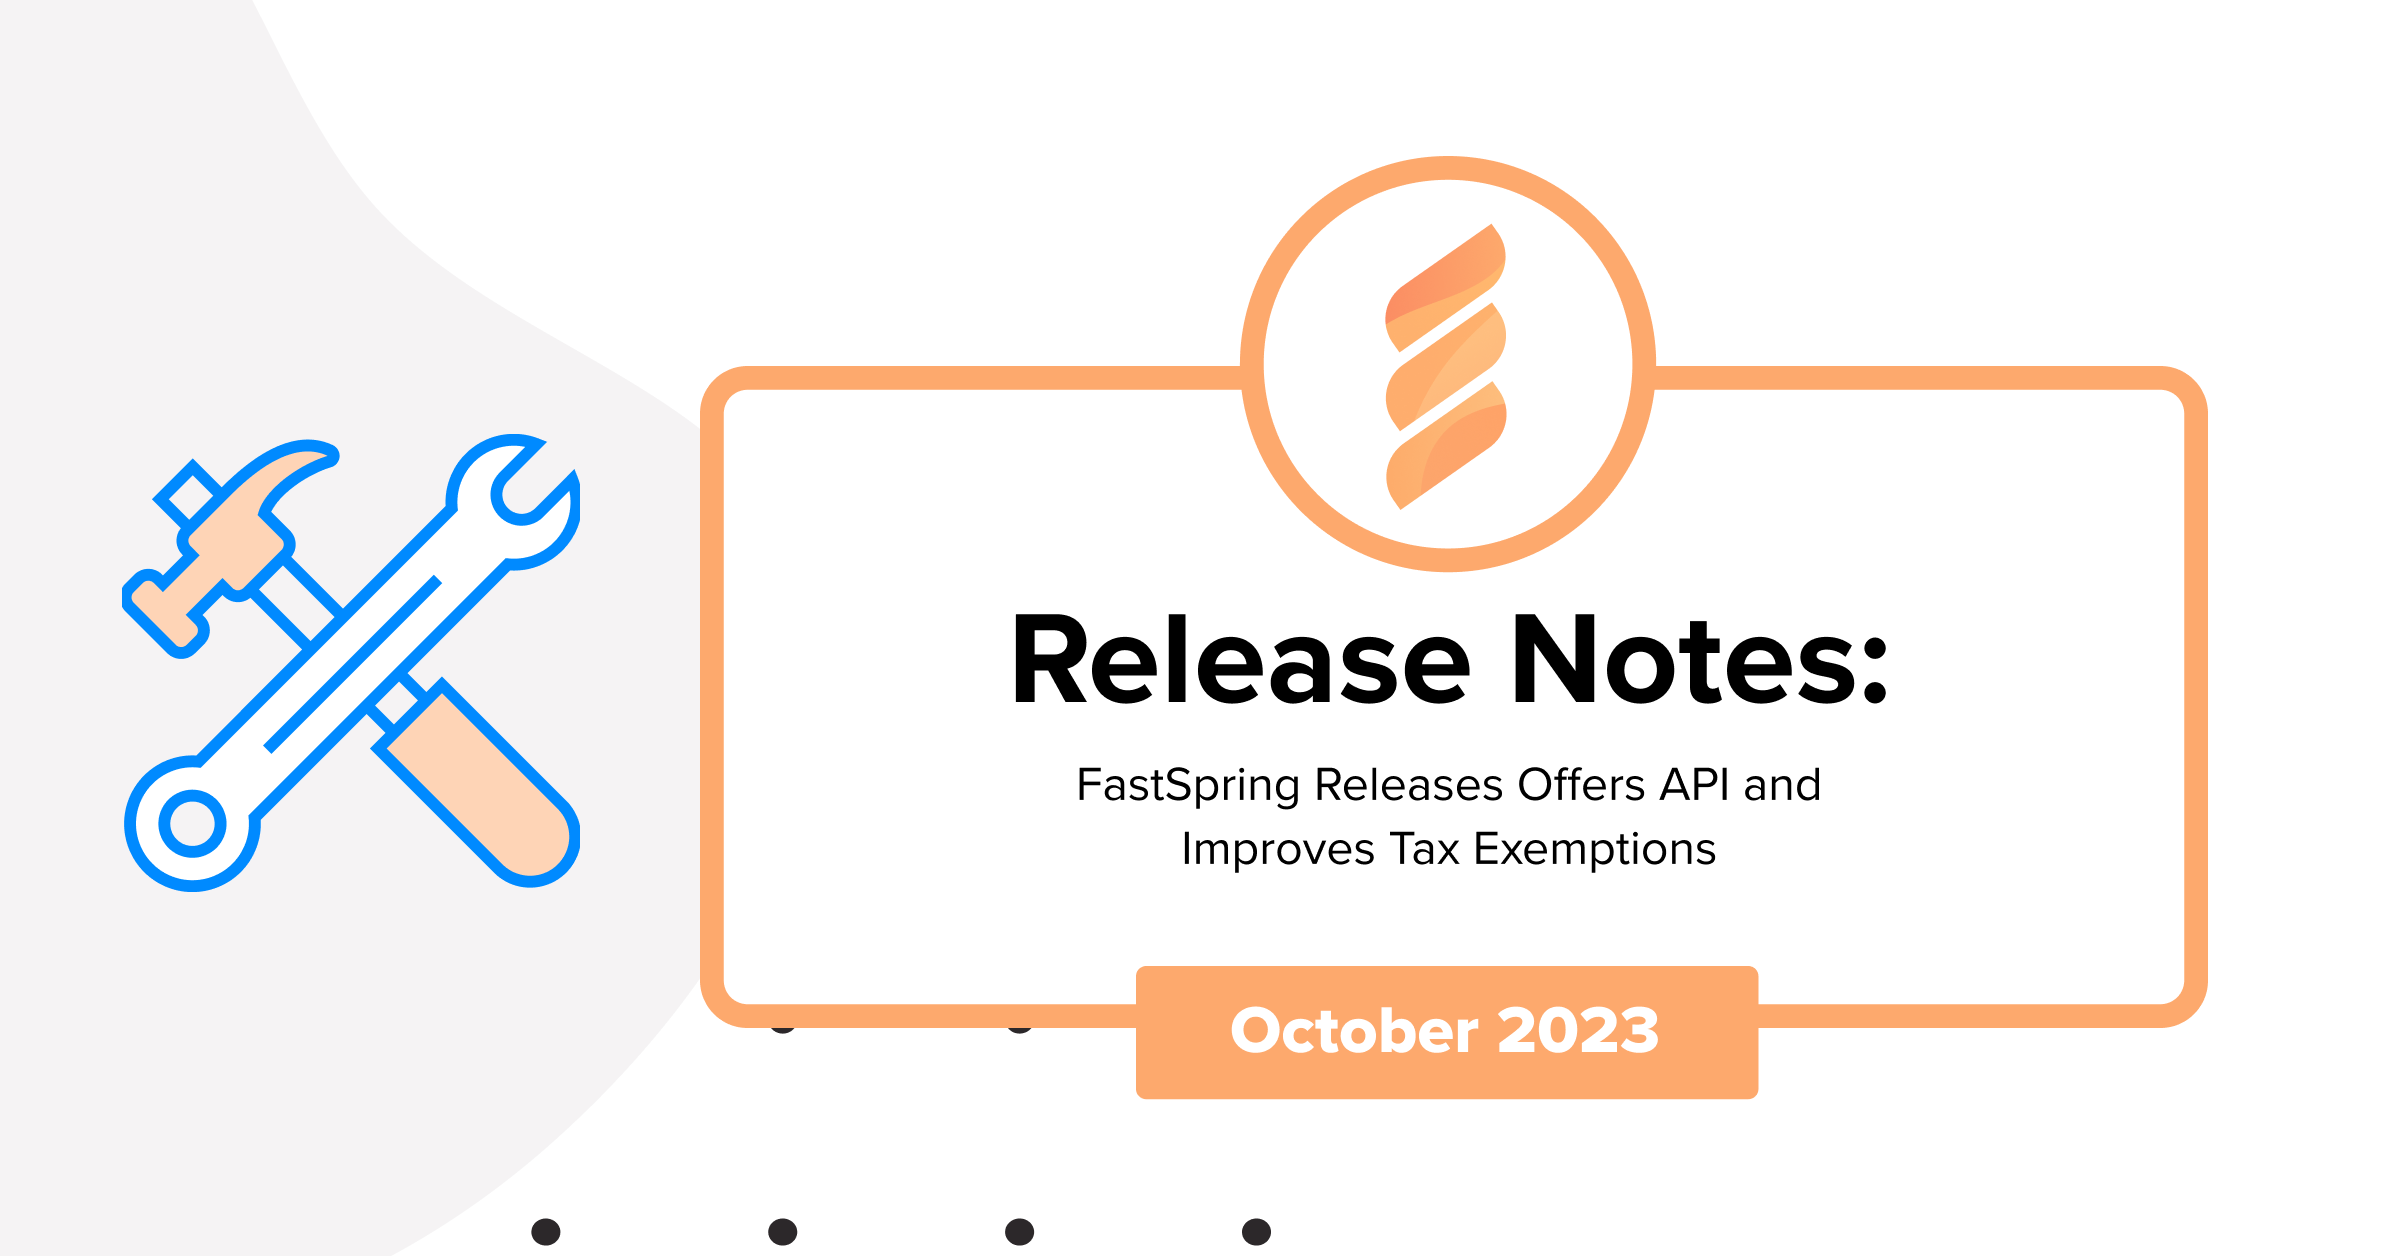 Release Notes | October 2023: Updates to Tax Exemptions and New Offers API